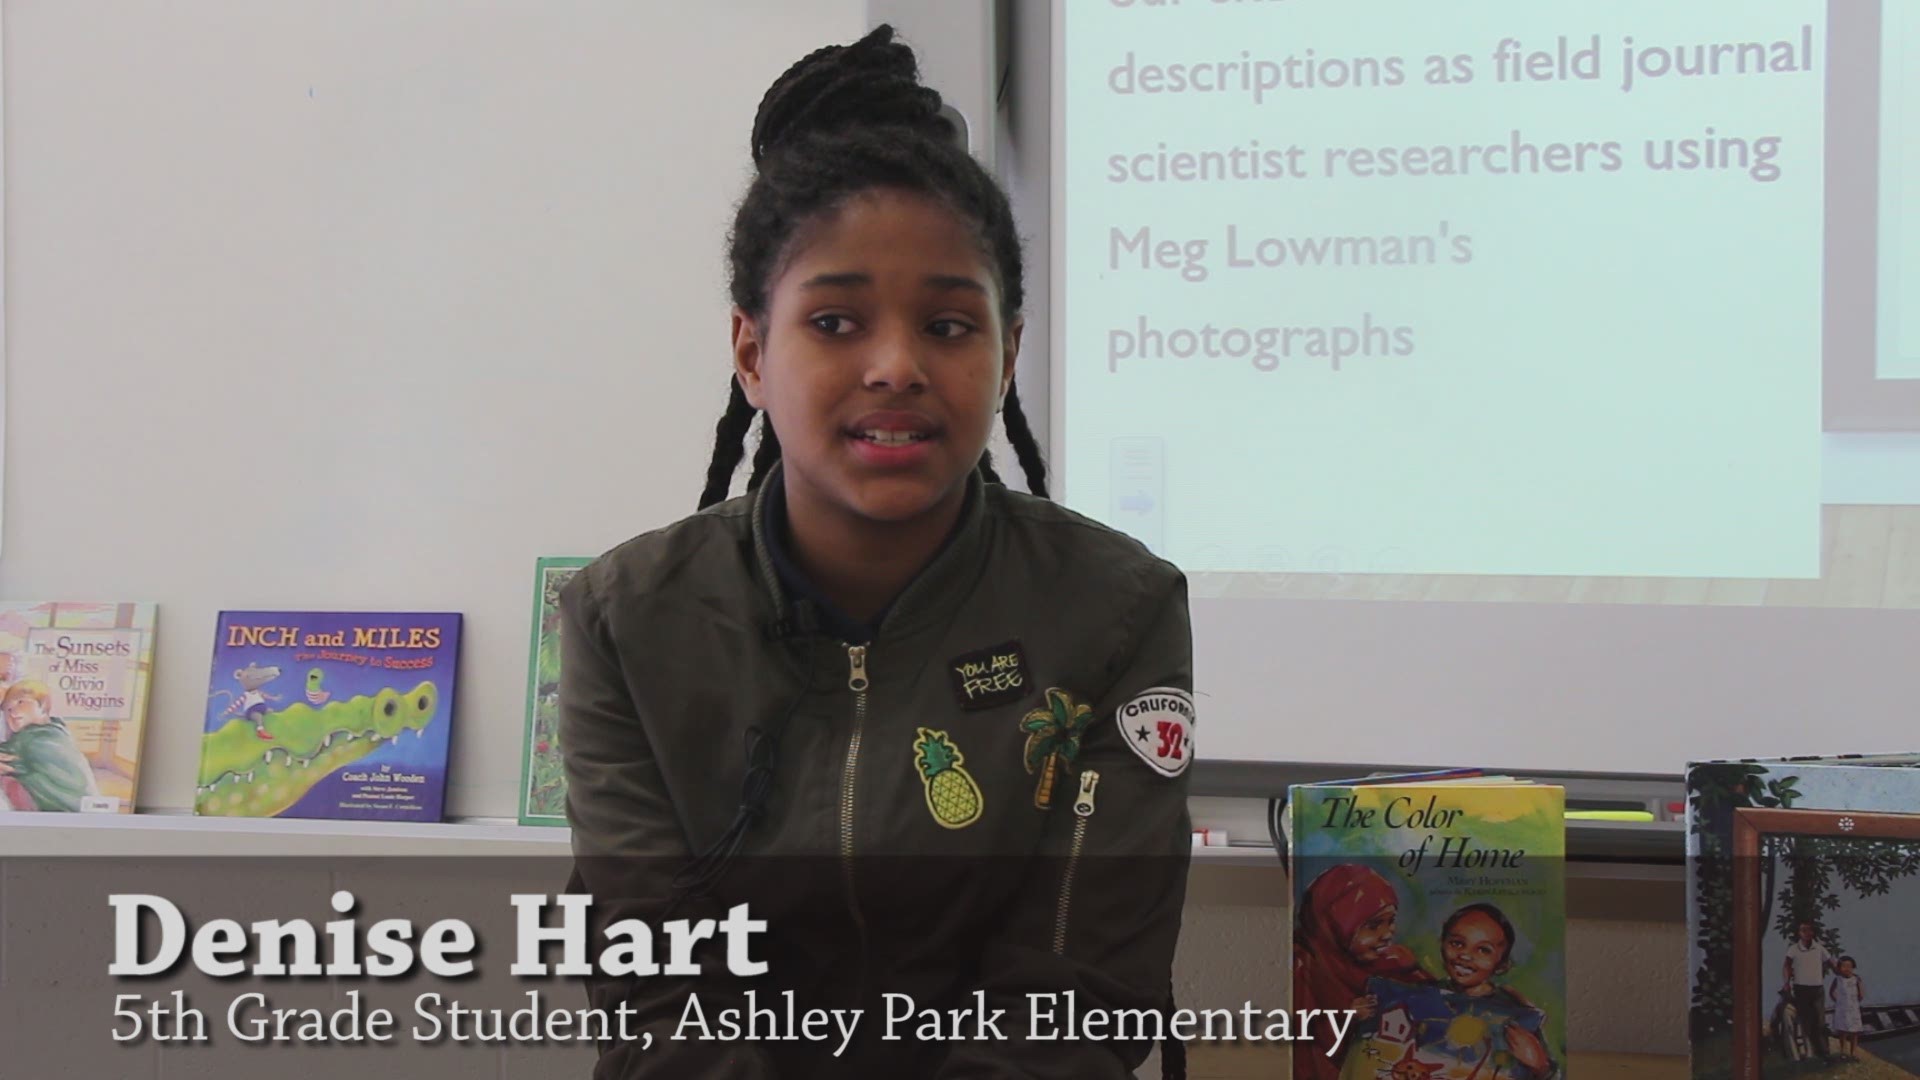 Most teachers start their day off with attendance, but a local teacher has found his own unique way to connect with students before they enter the classroom. One of his students, Denise Hart, discusses.